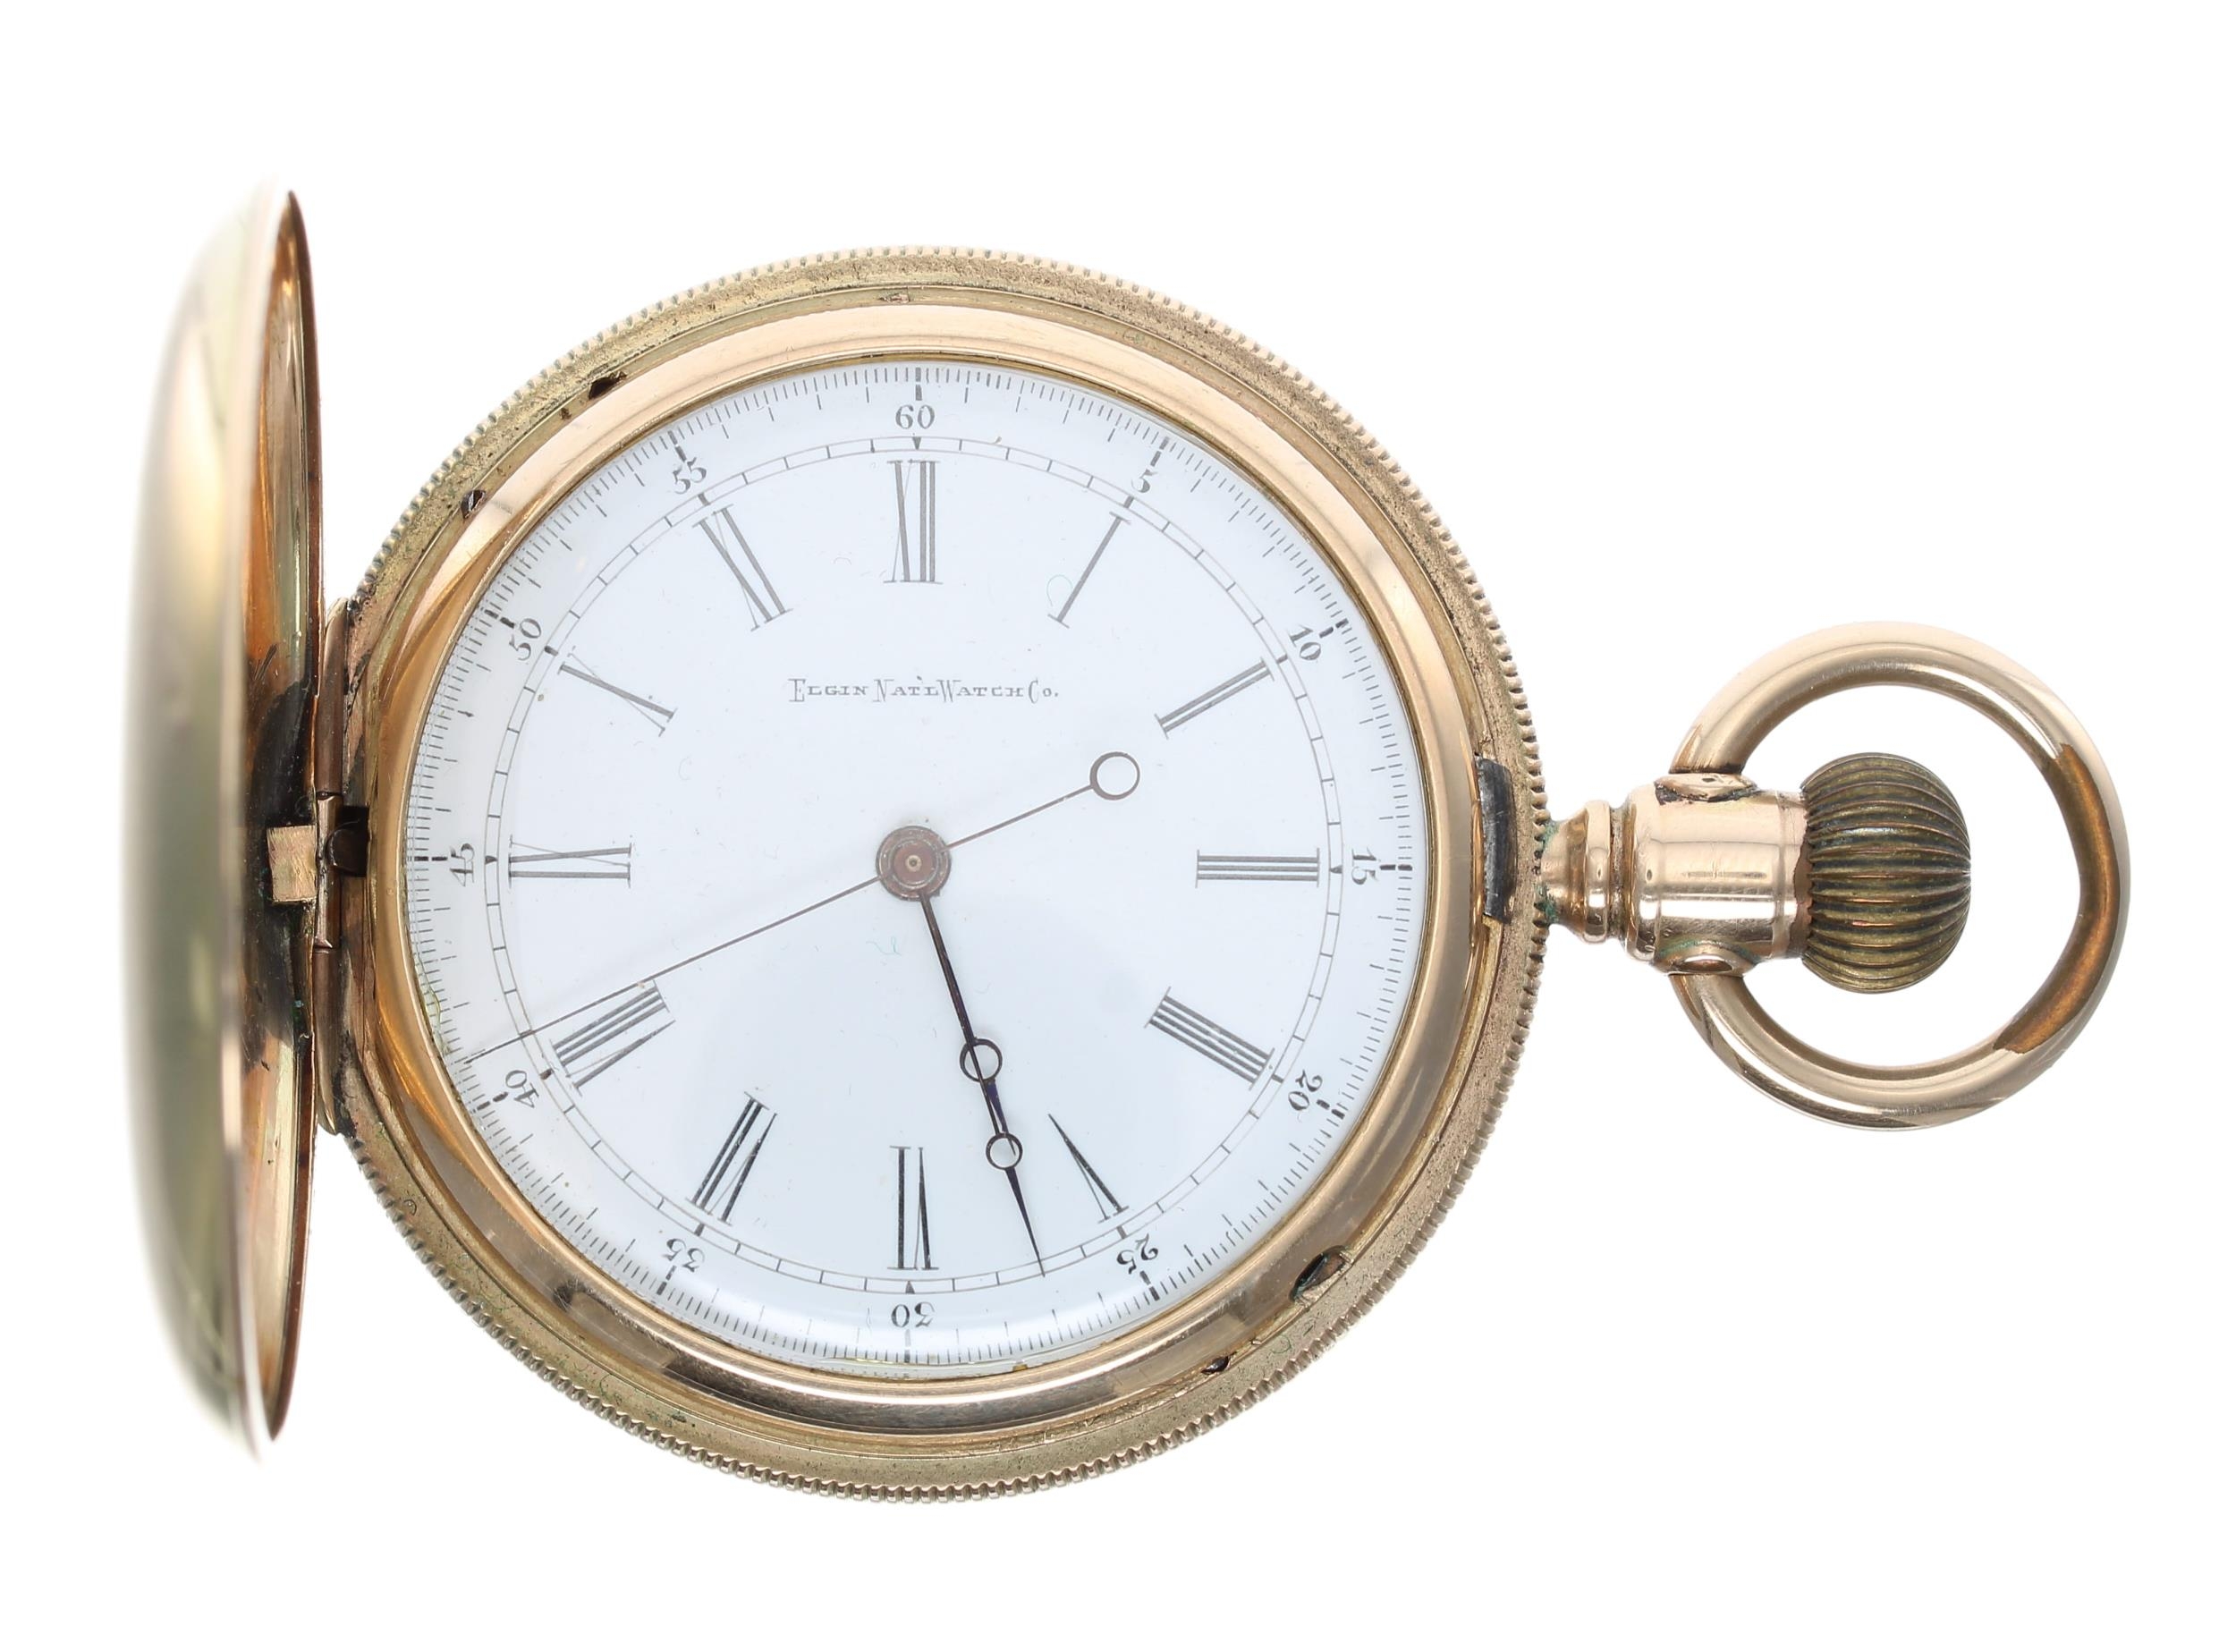 Elgin National Watch Co. centre seconds gold plated lever set hunter pocket watch, circa 1881, - Image 2 of 5